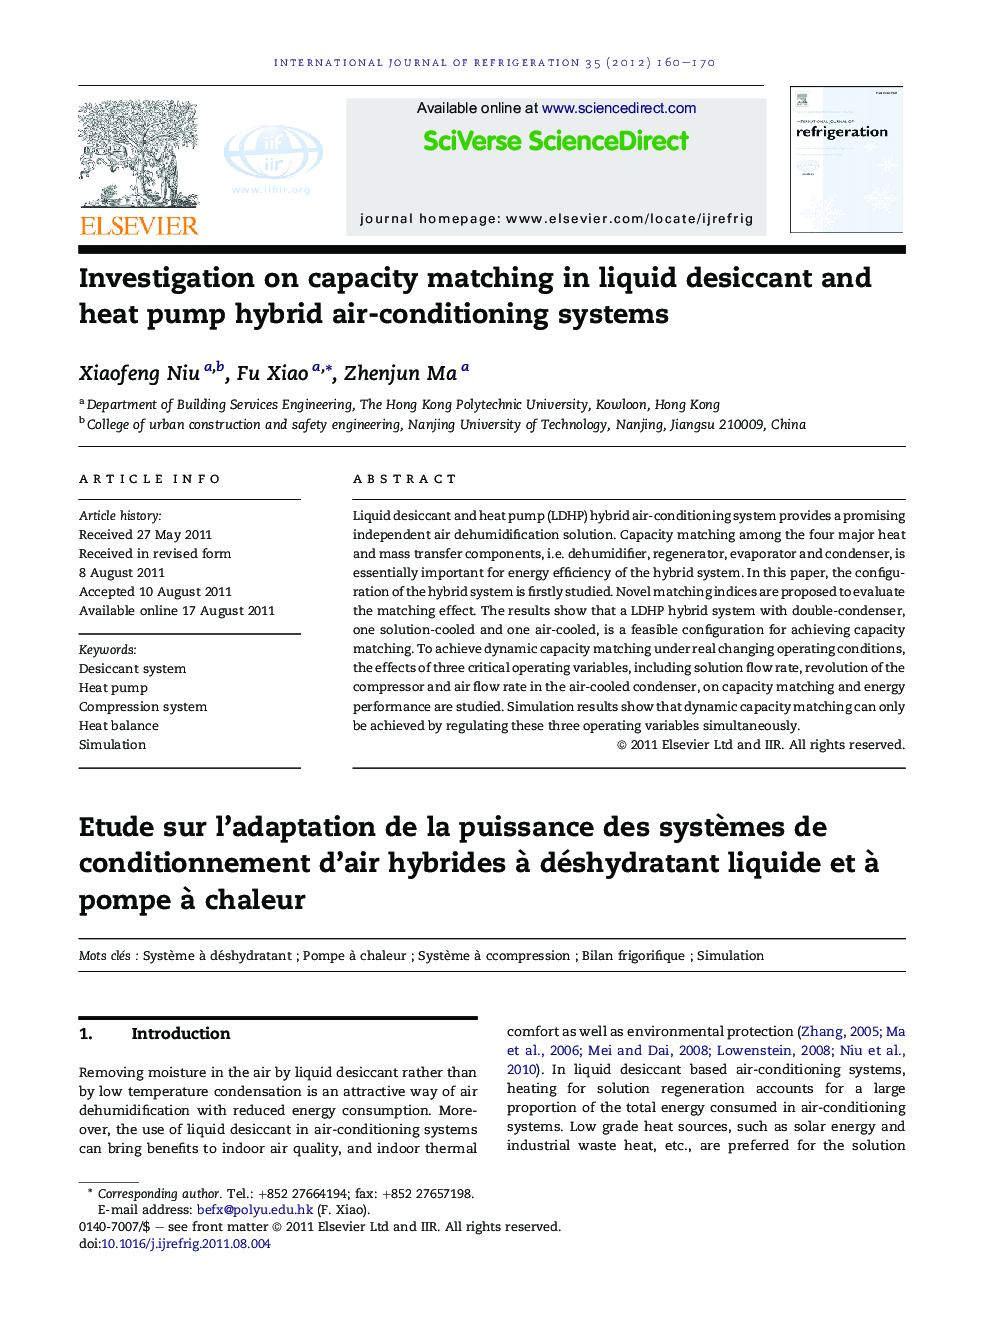 Investigation on capacity matching in liquid desiccant and heat pump hybrid air-conditioning systems